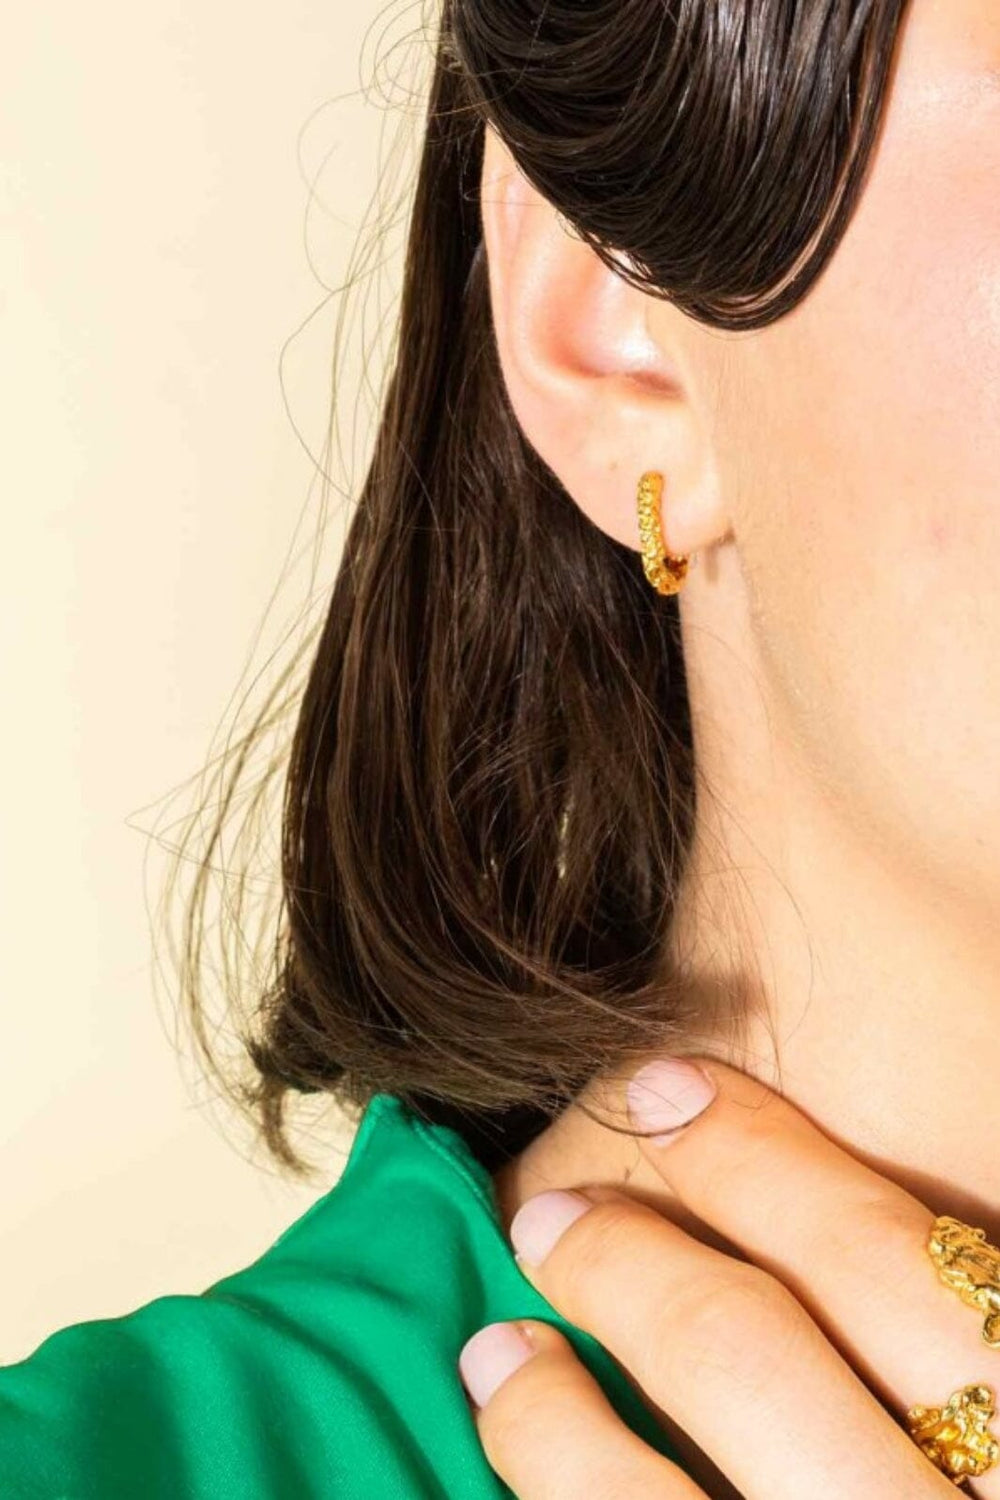 House Of Vincent - Riddle Hoop Earrings - Gilded 